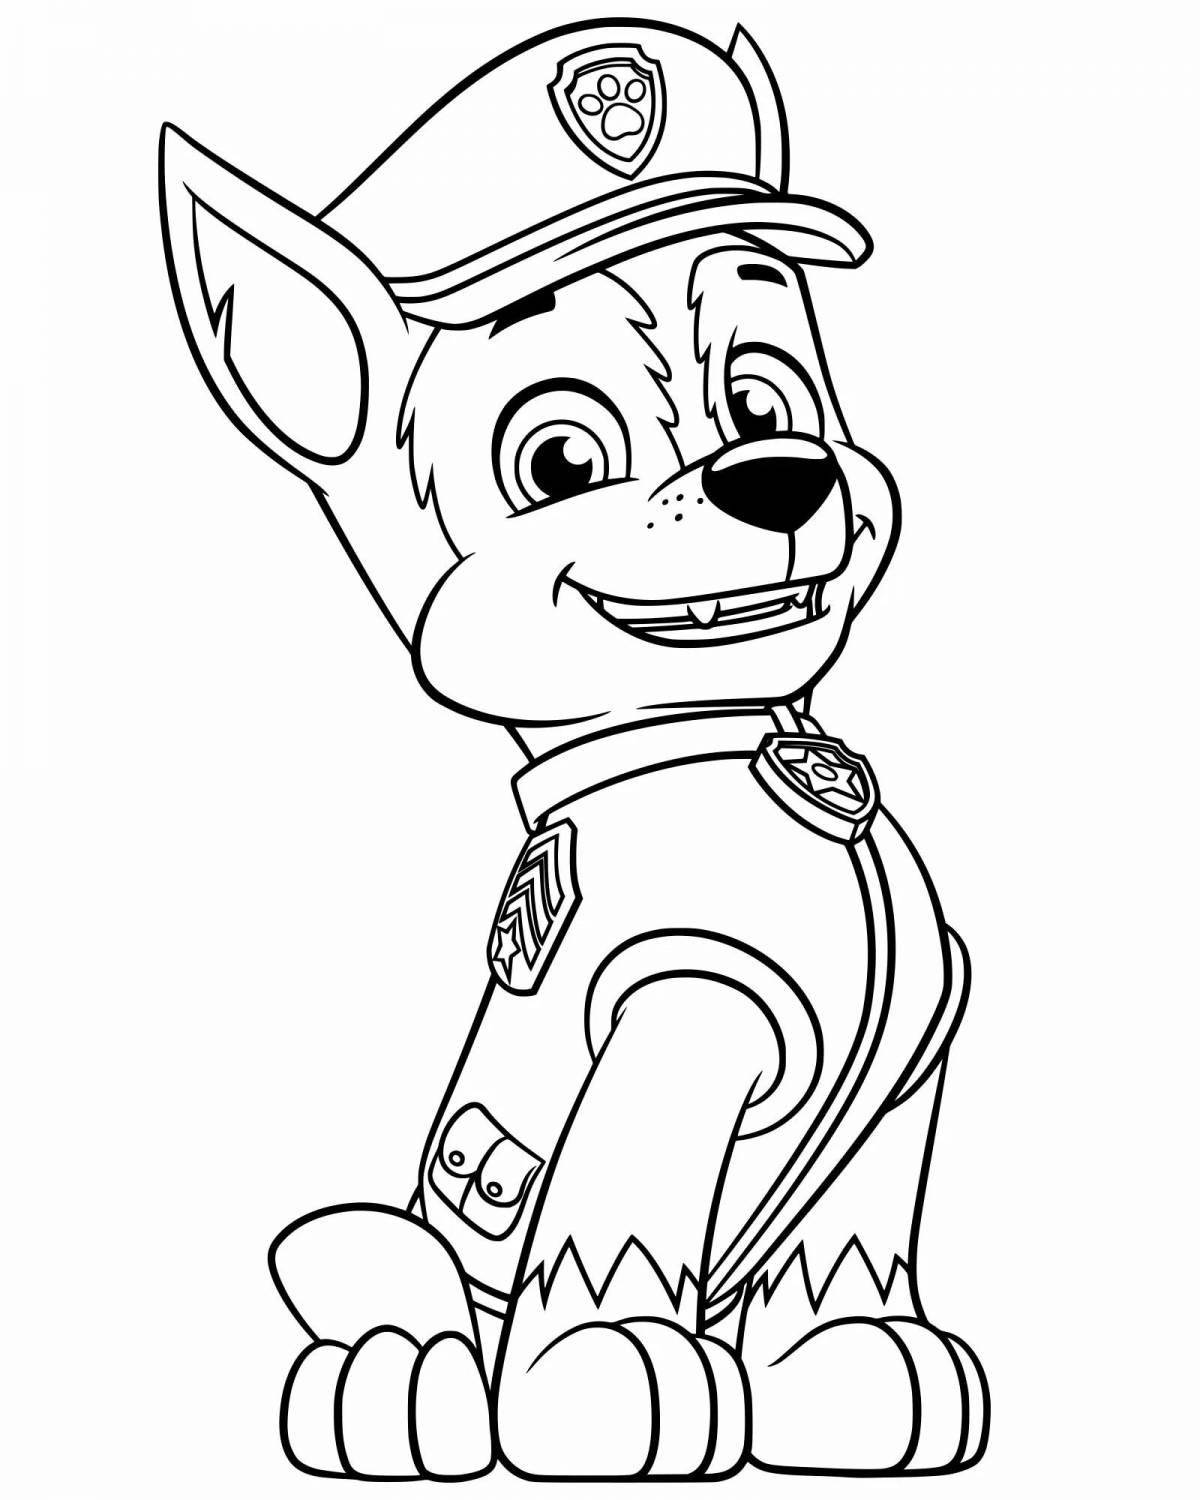 Comic coloring page paw patrol for children 5 years old